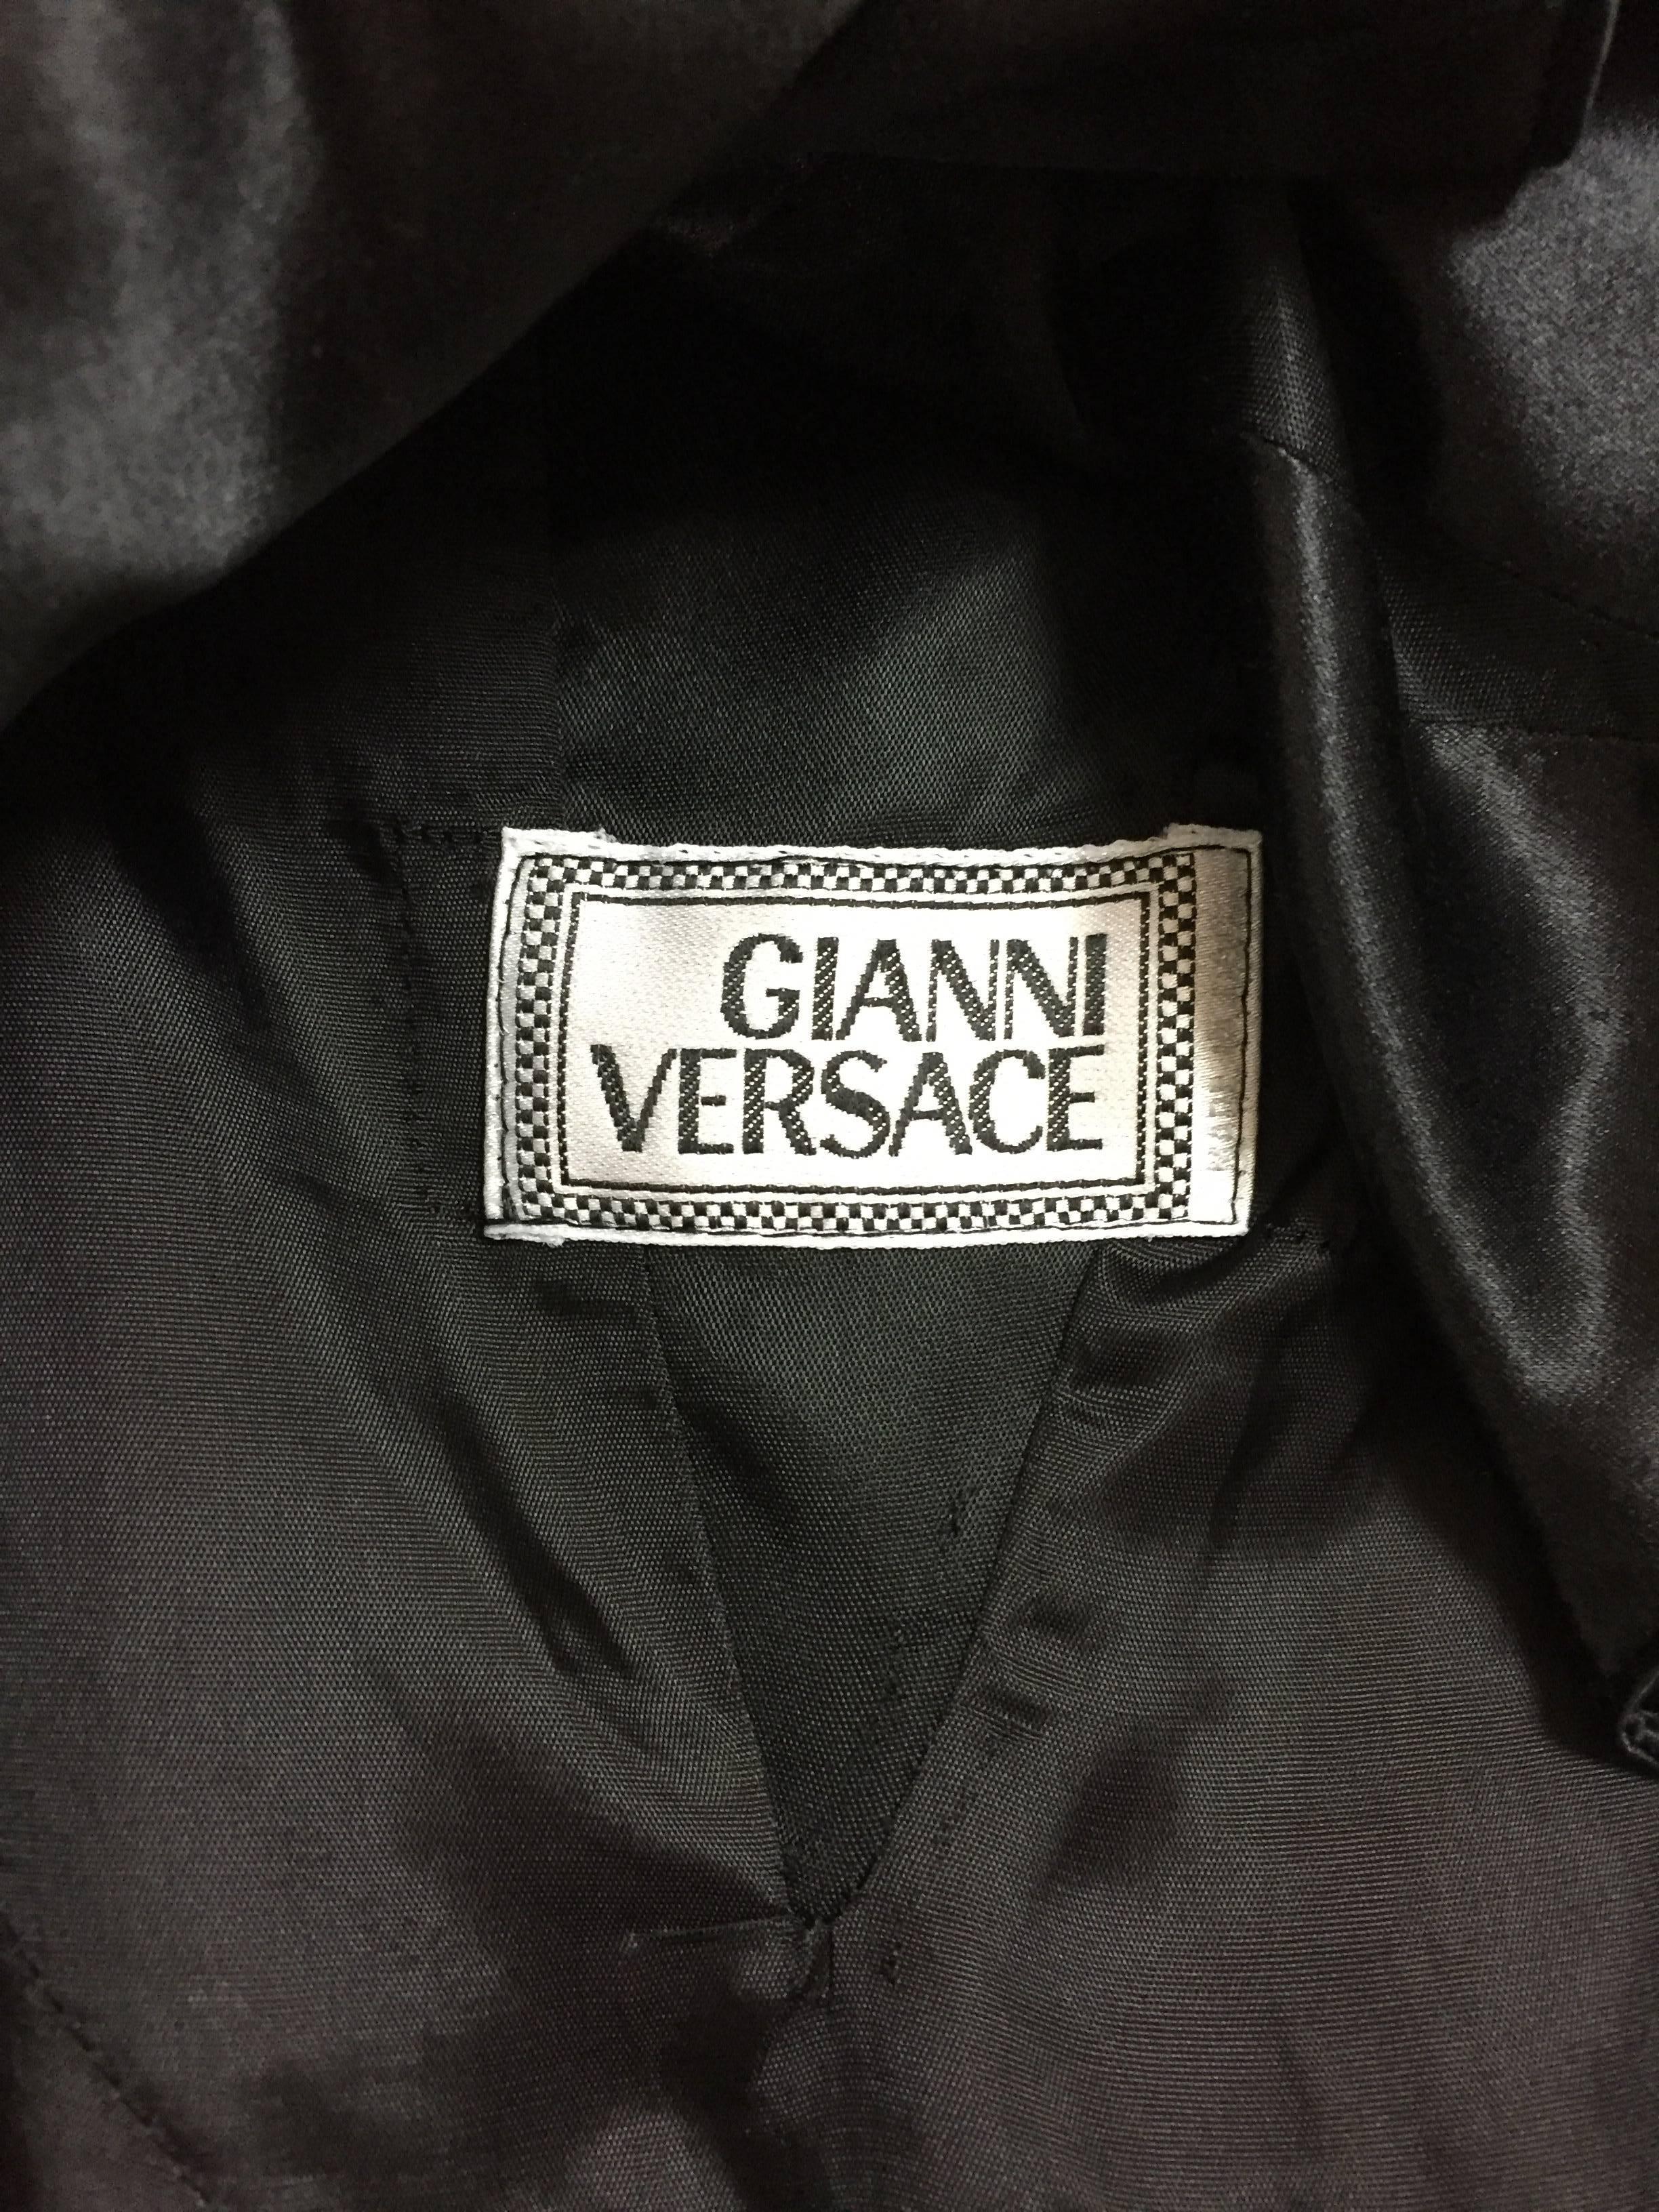 F/W 1998 Gianni Versace Runway Plunging Black Leather Long Gown Dress In Good Condition In Yukon, OK